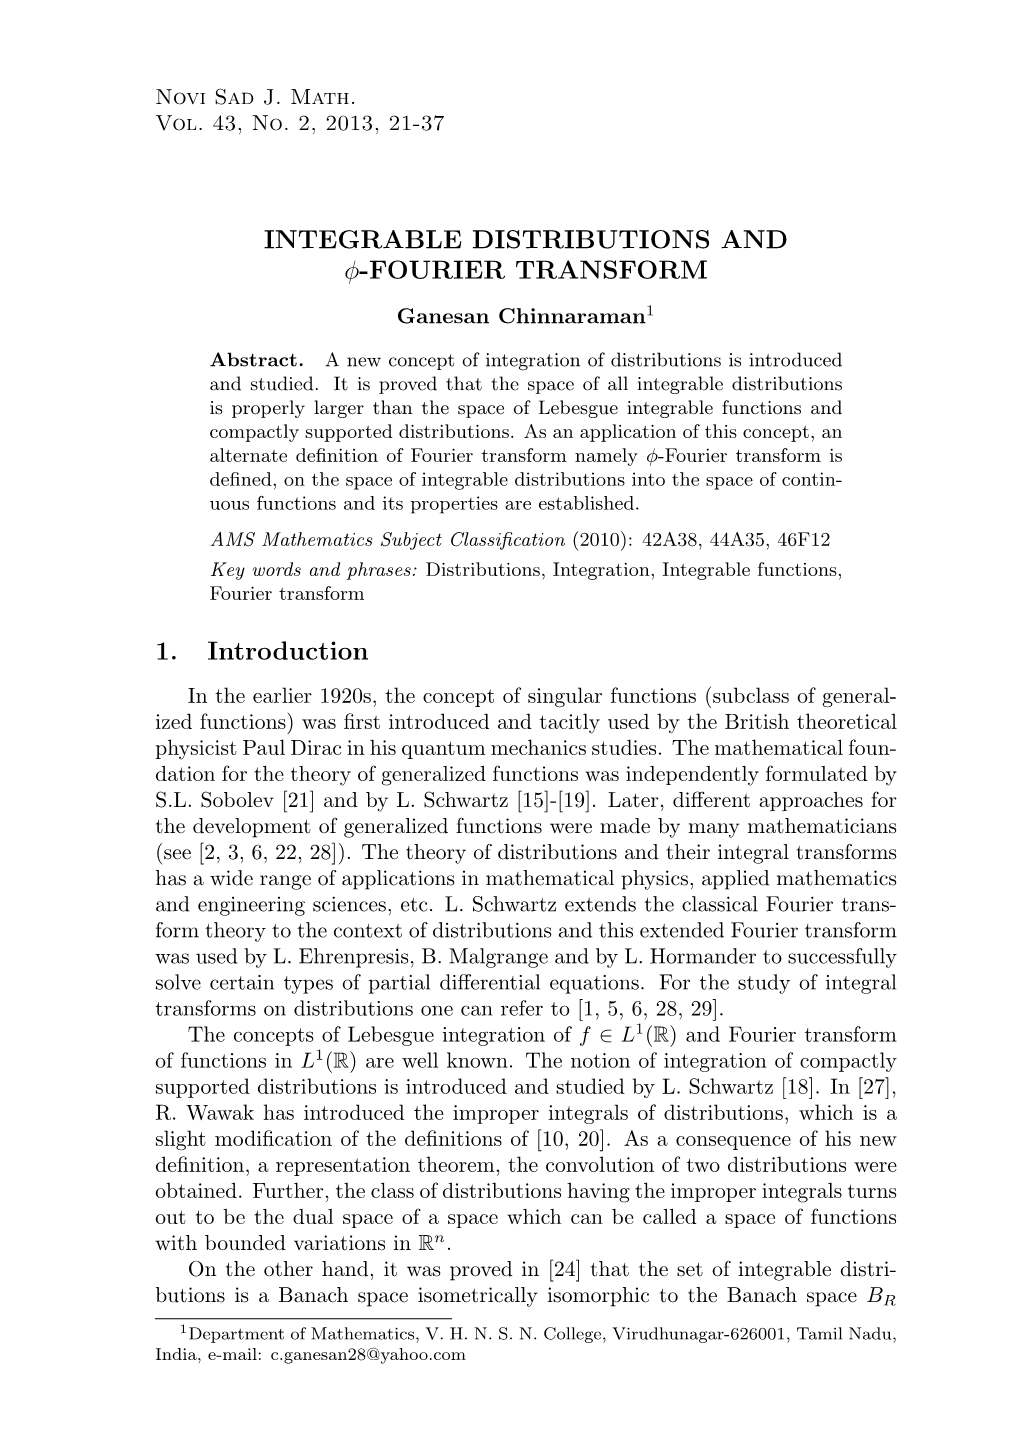 Integrable Distributions and Φ-Fourier Transform